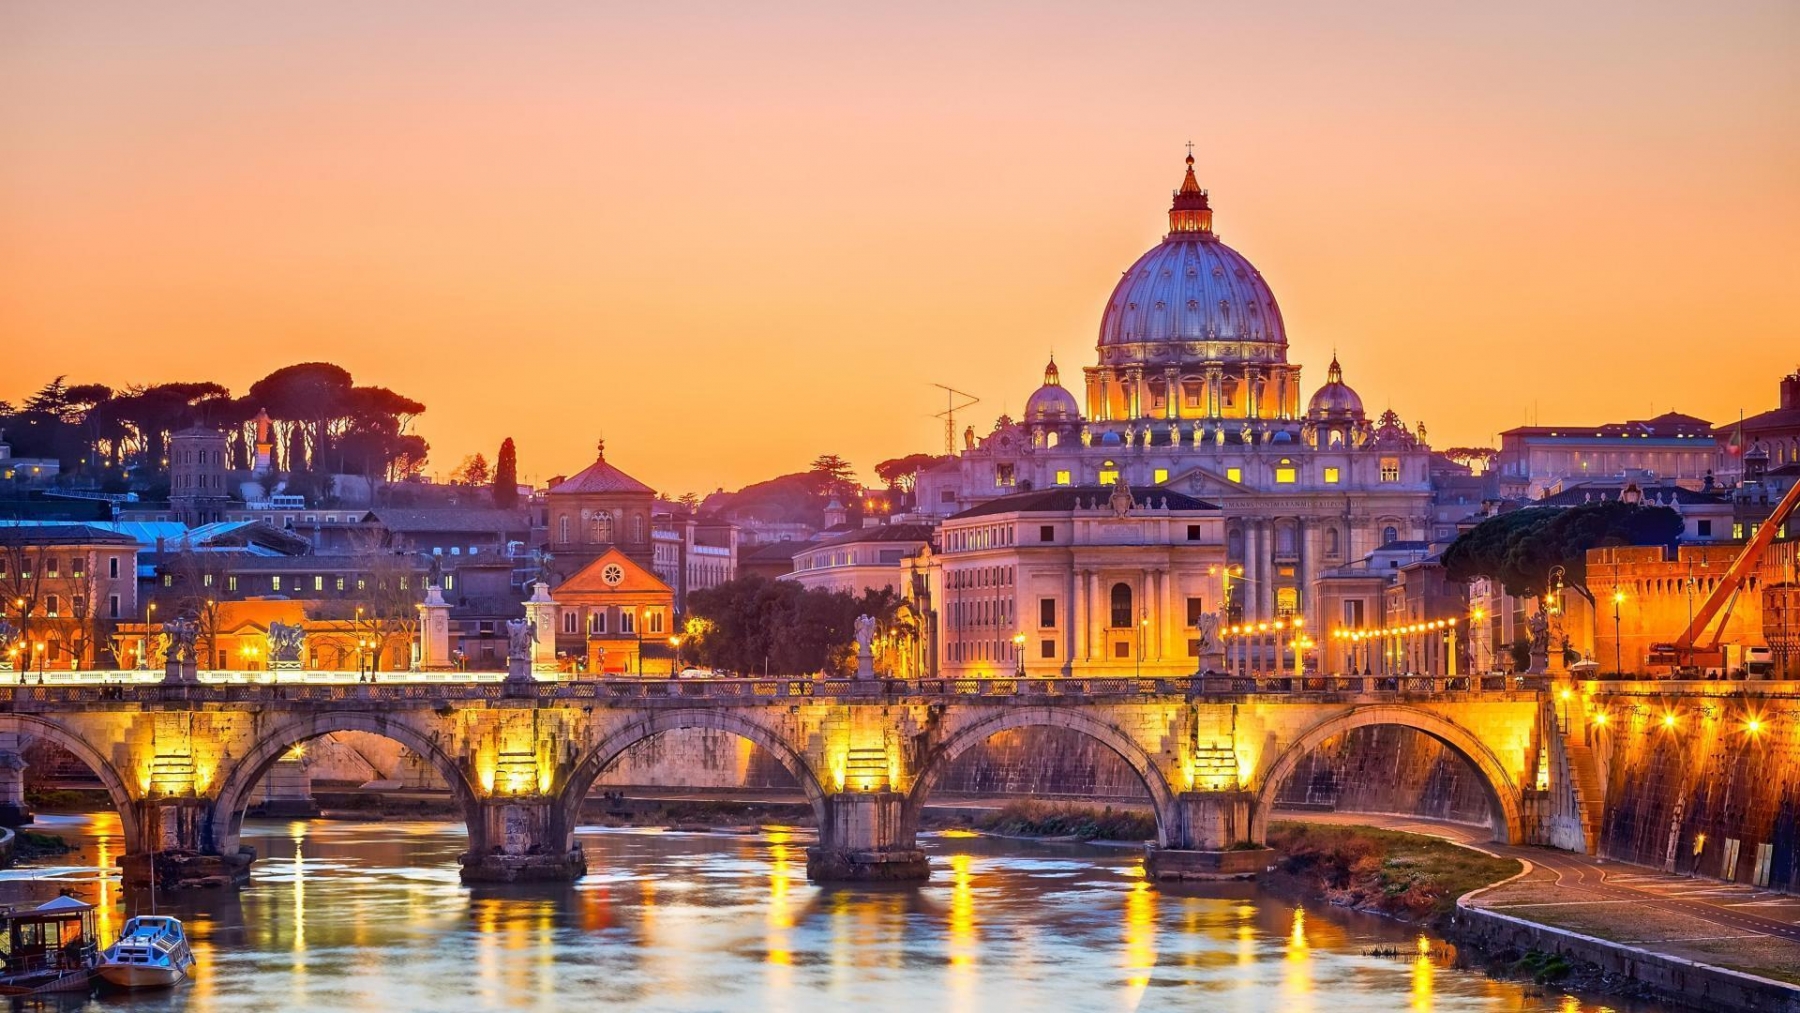 Italy’s capital - Rome - HD Wallpapers and Background Images | YL Computing